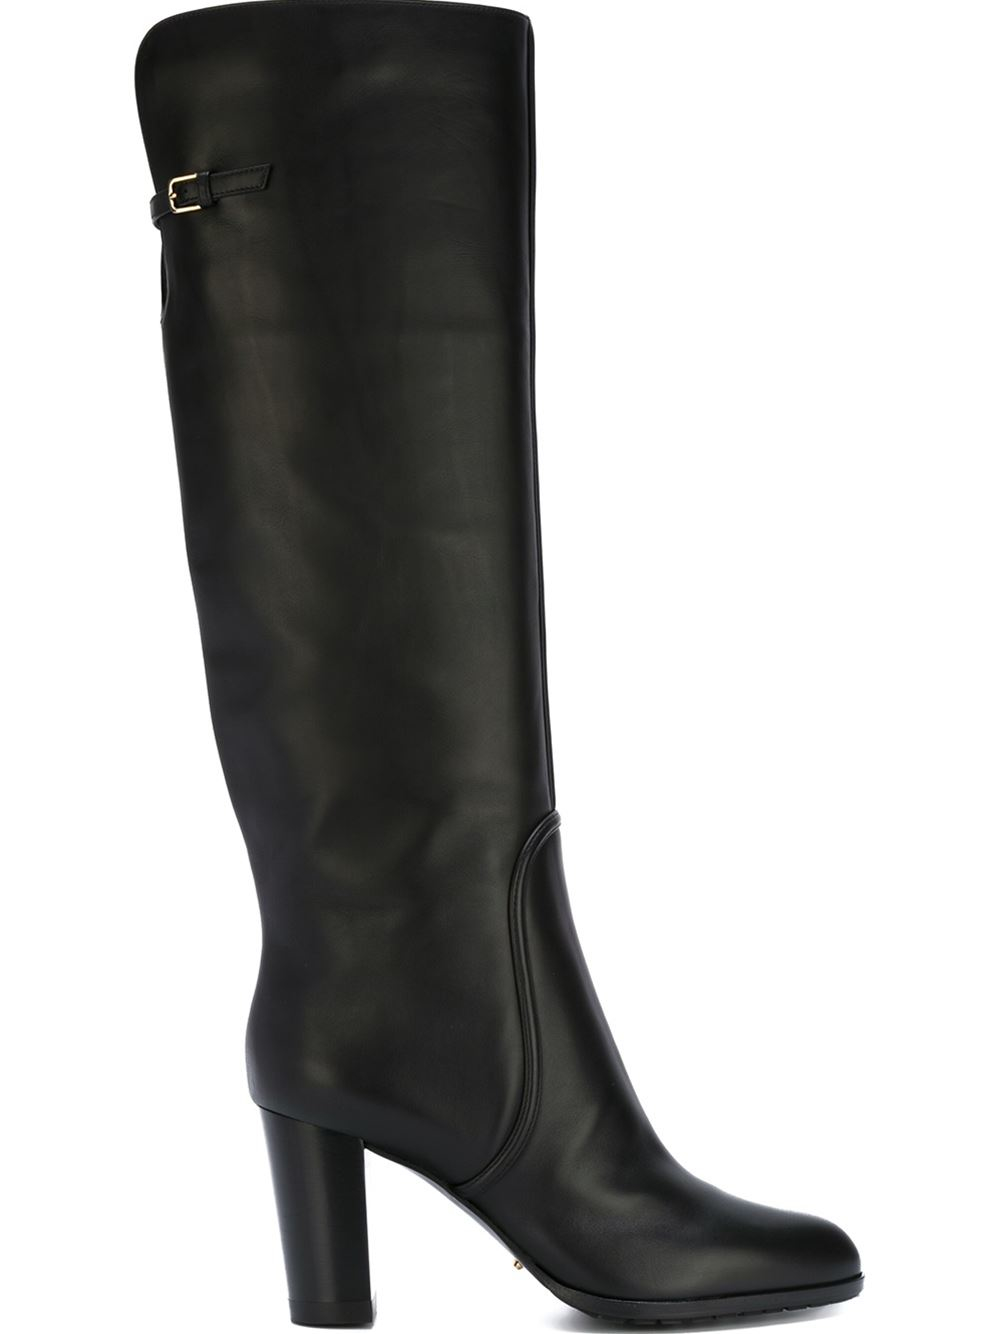 Lyst - Sergio Rossi 'shannen' Boots in Black